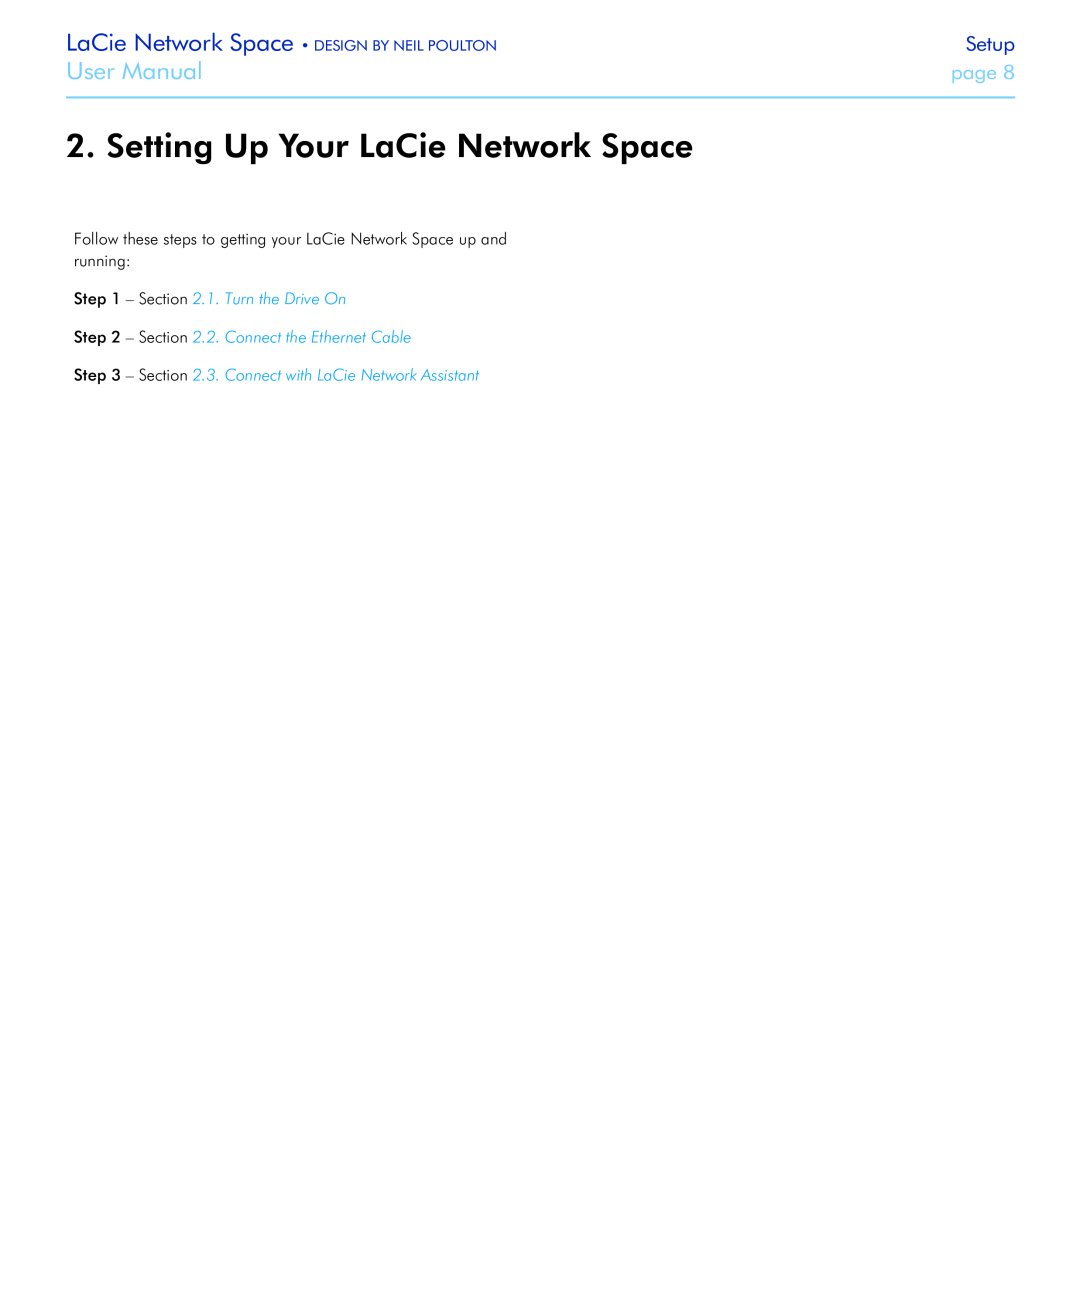 LaCie Setting Up Your LaCie Network Space, Setup, 1. Turn the Drive On, 2. Connect the Ethernet Cable, User Manual 